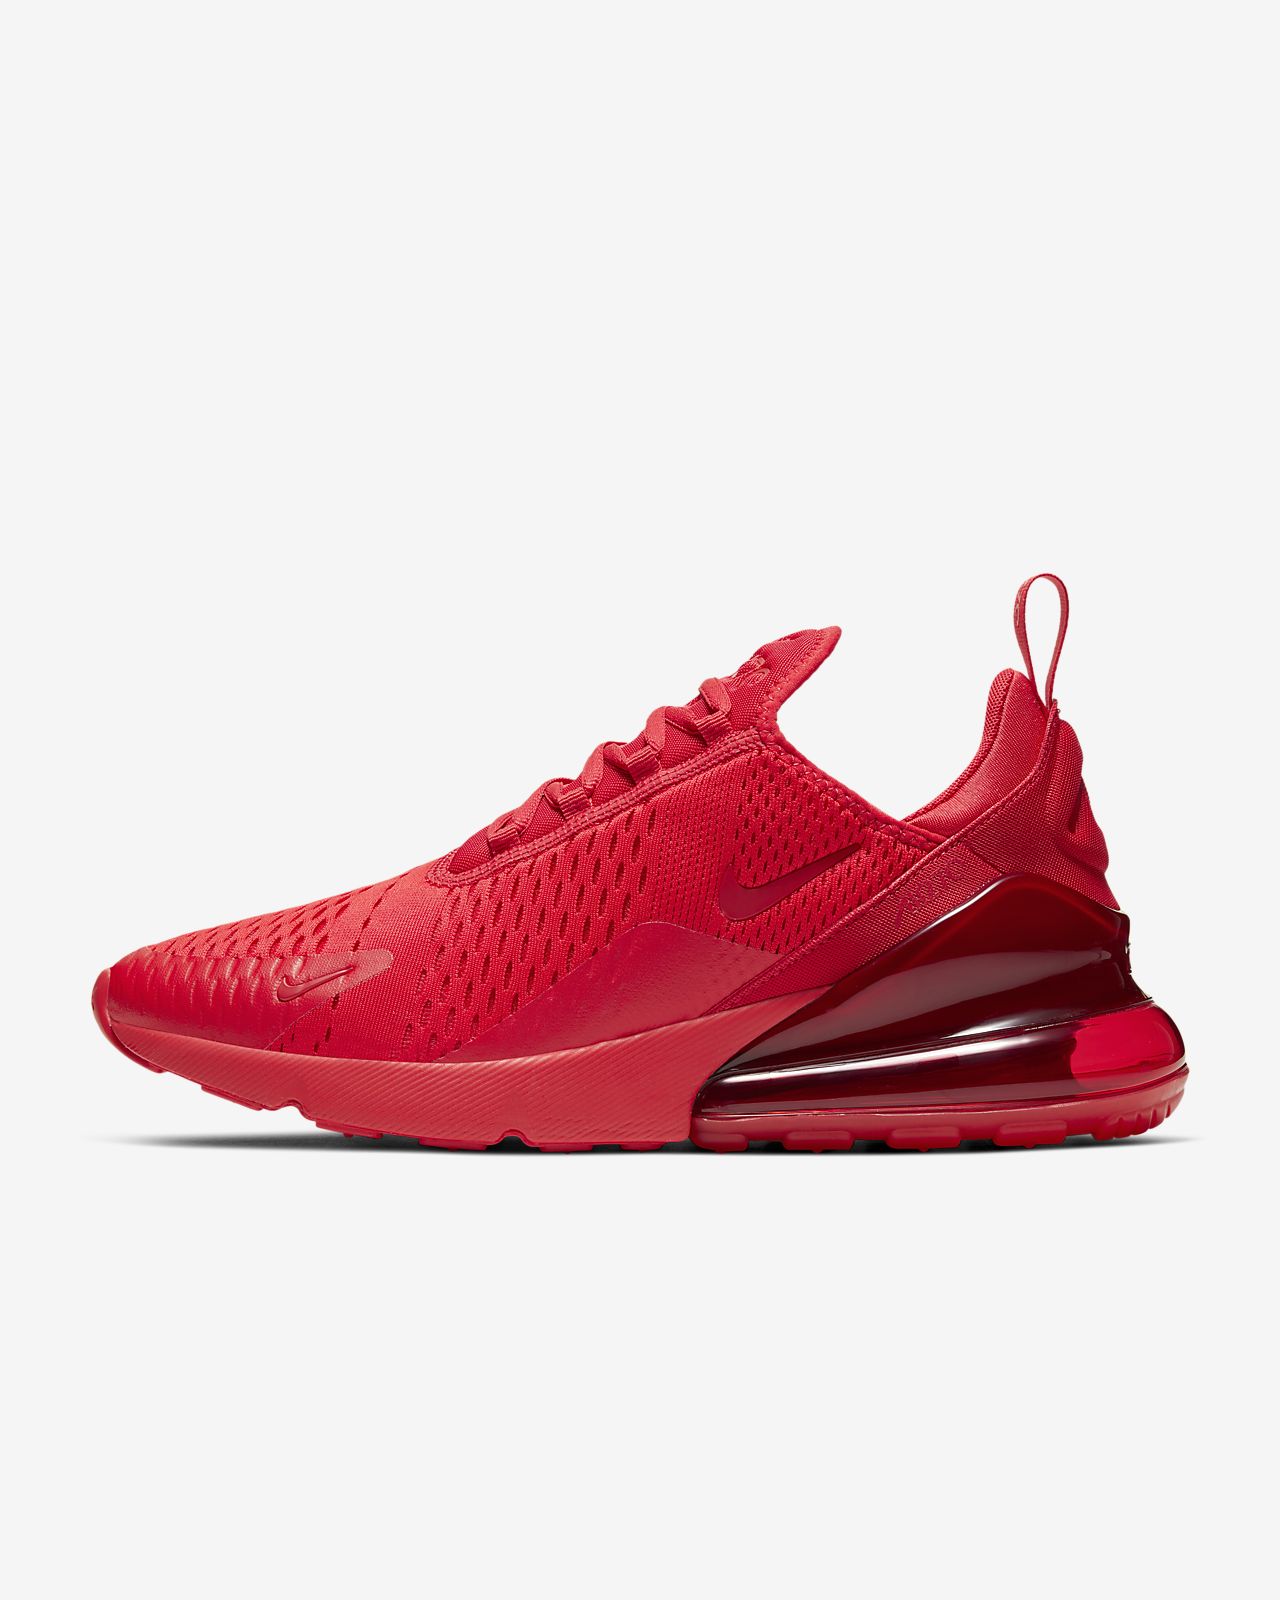 red and black nike air max 270 Cheap 